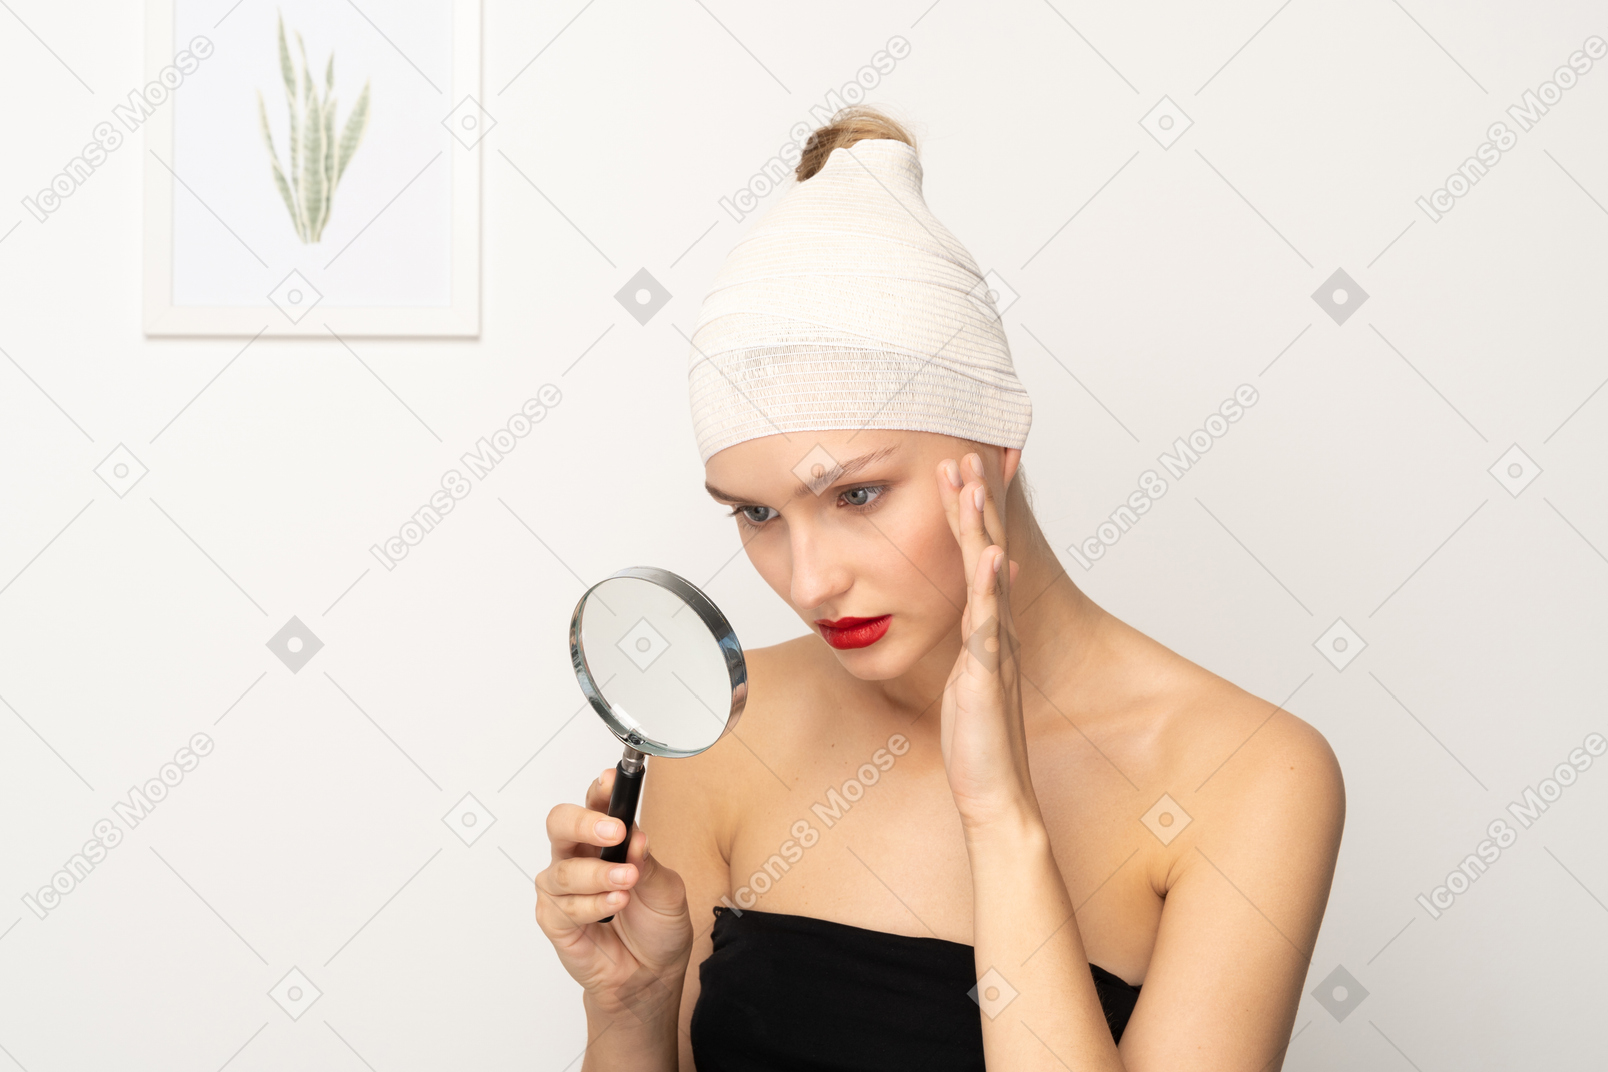 Young woman looking through magnifier and touching her cheek